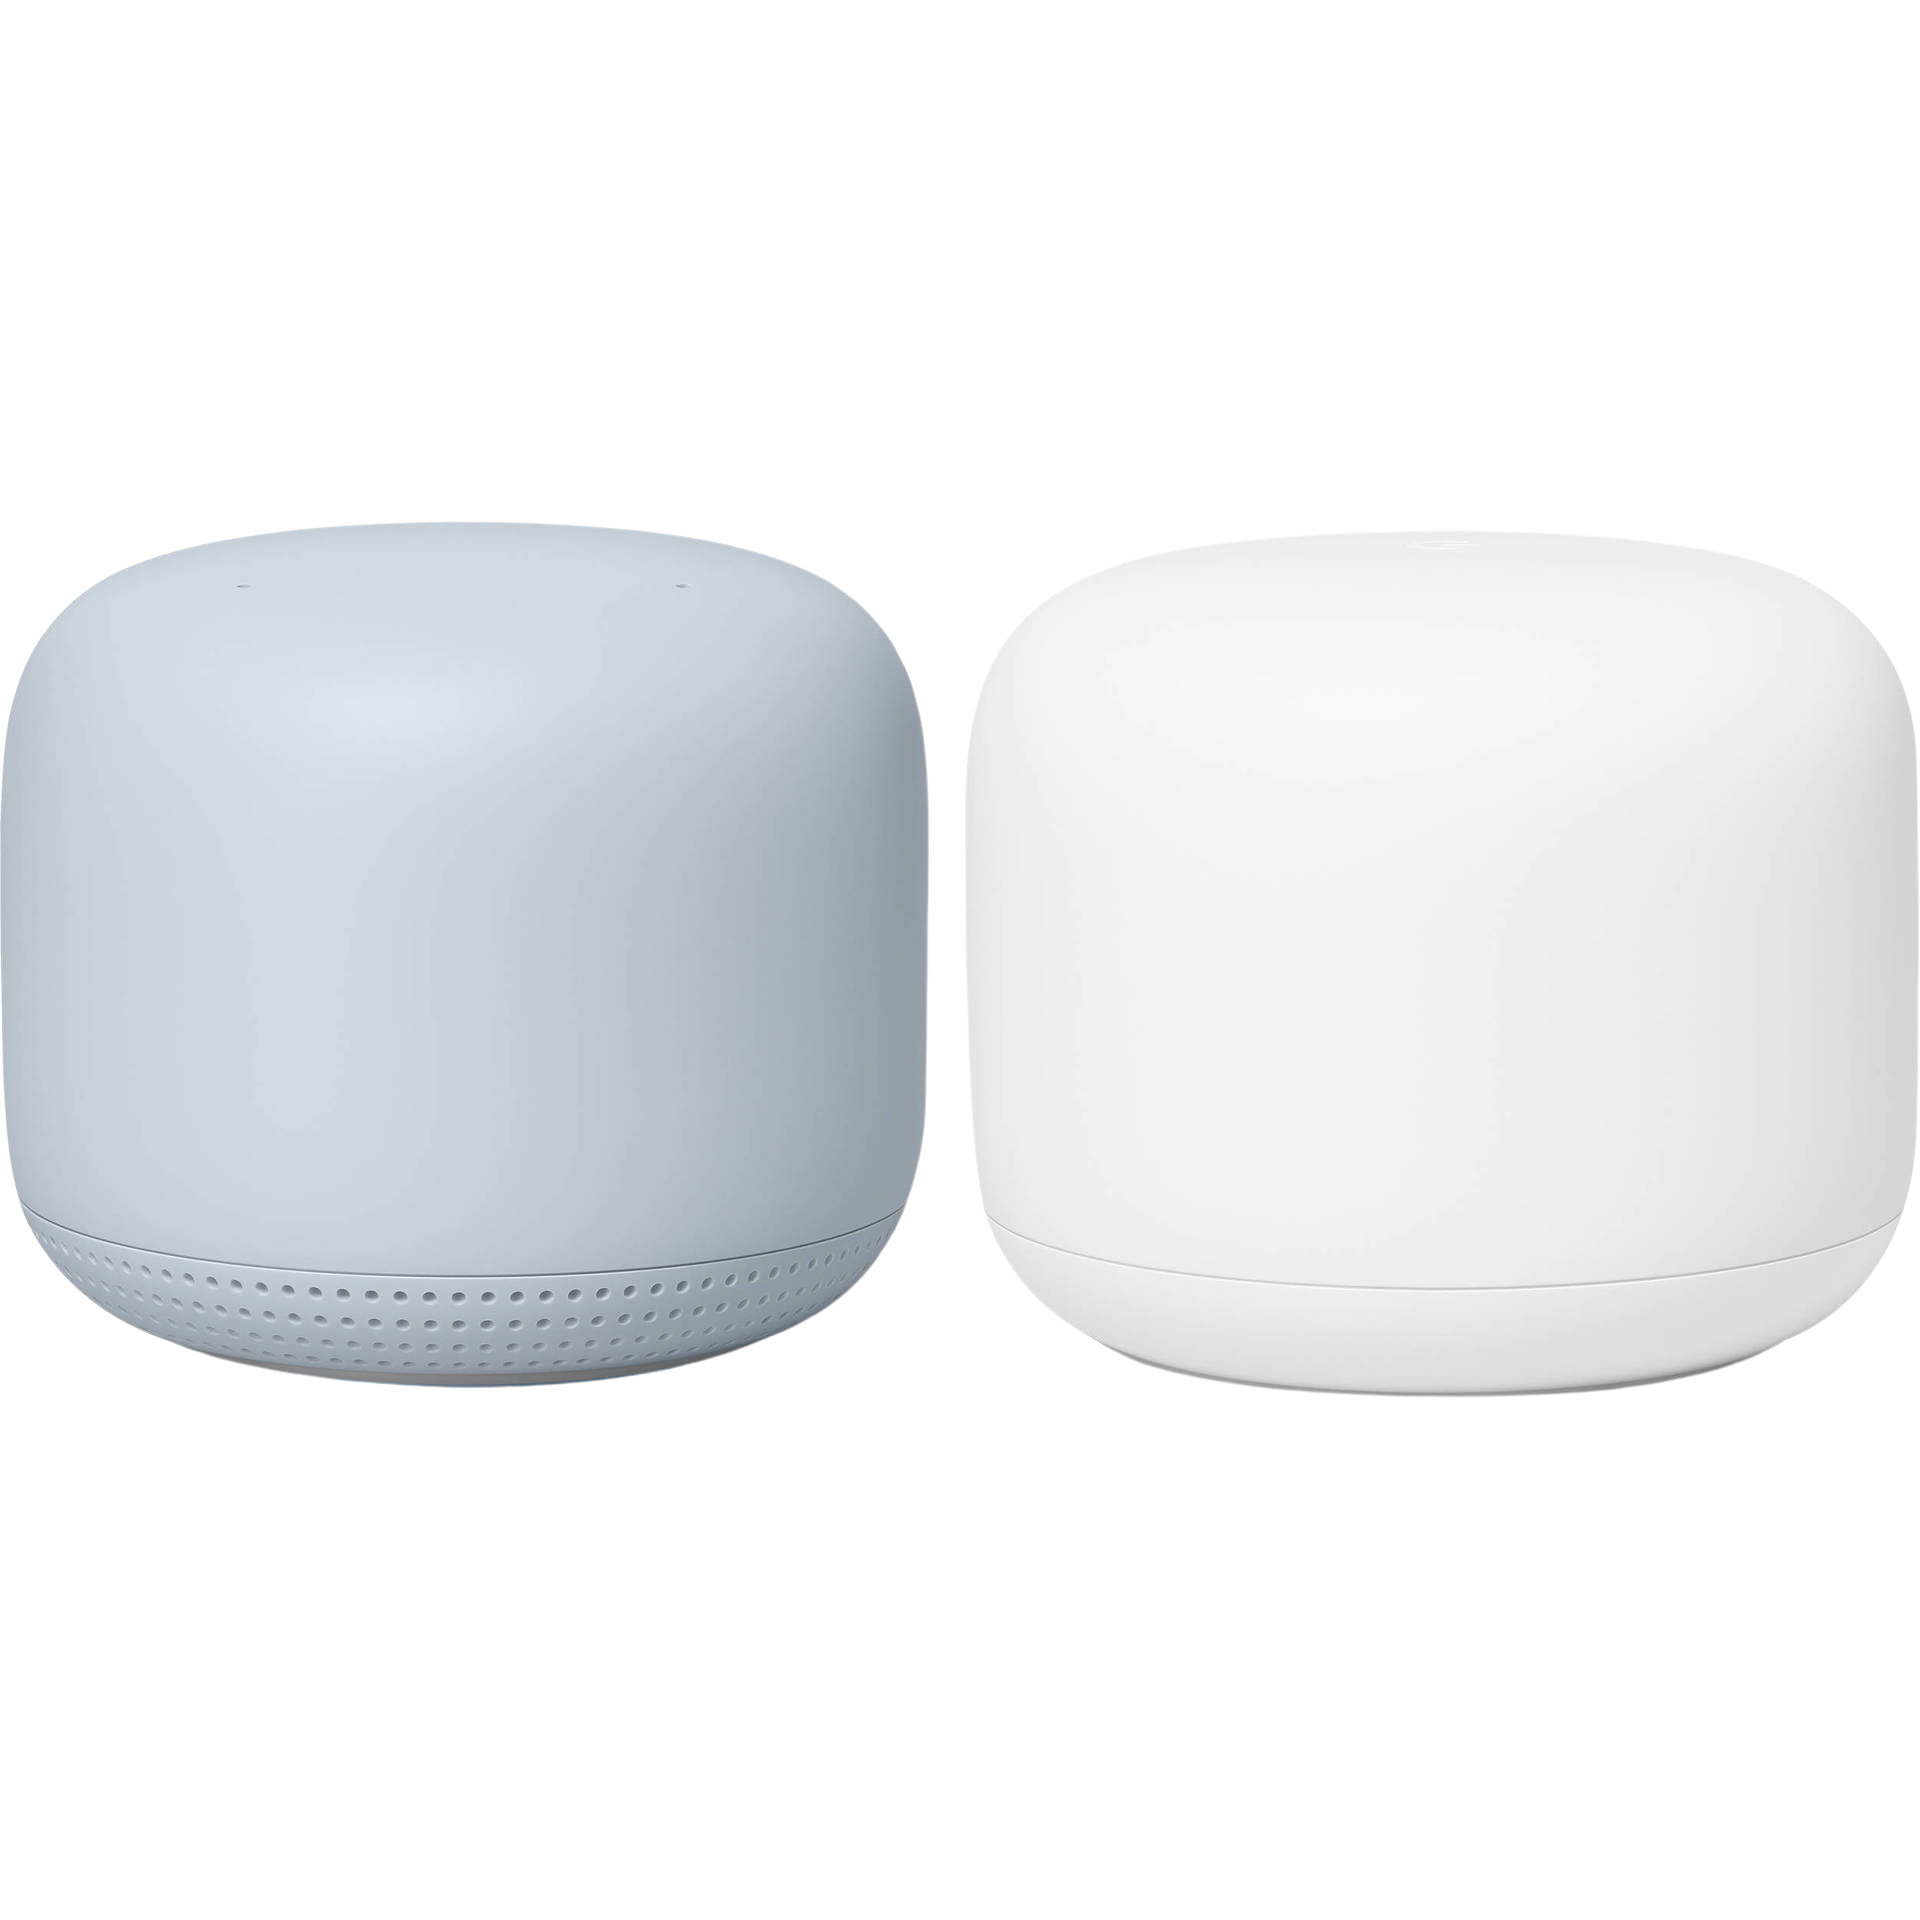 google wifi router and point